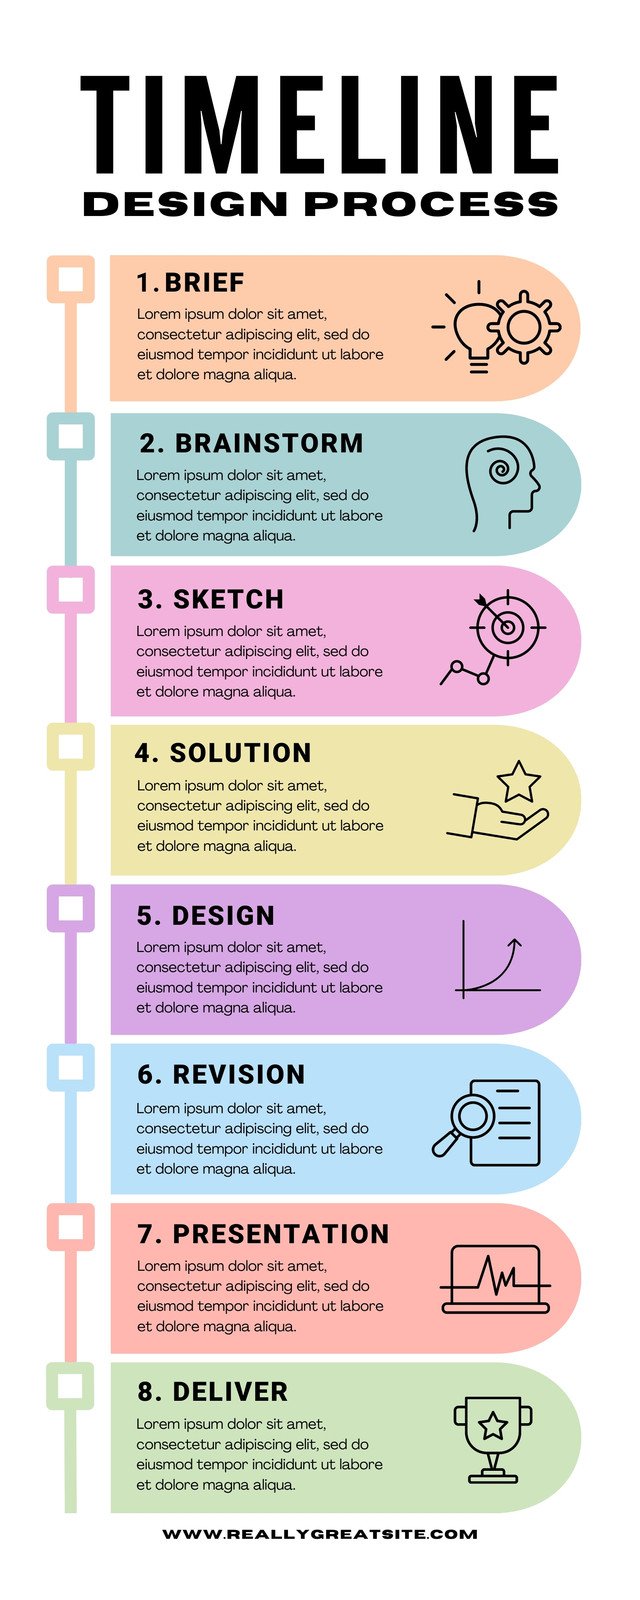 White Colorful Modern Timeline Design Process Infographic